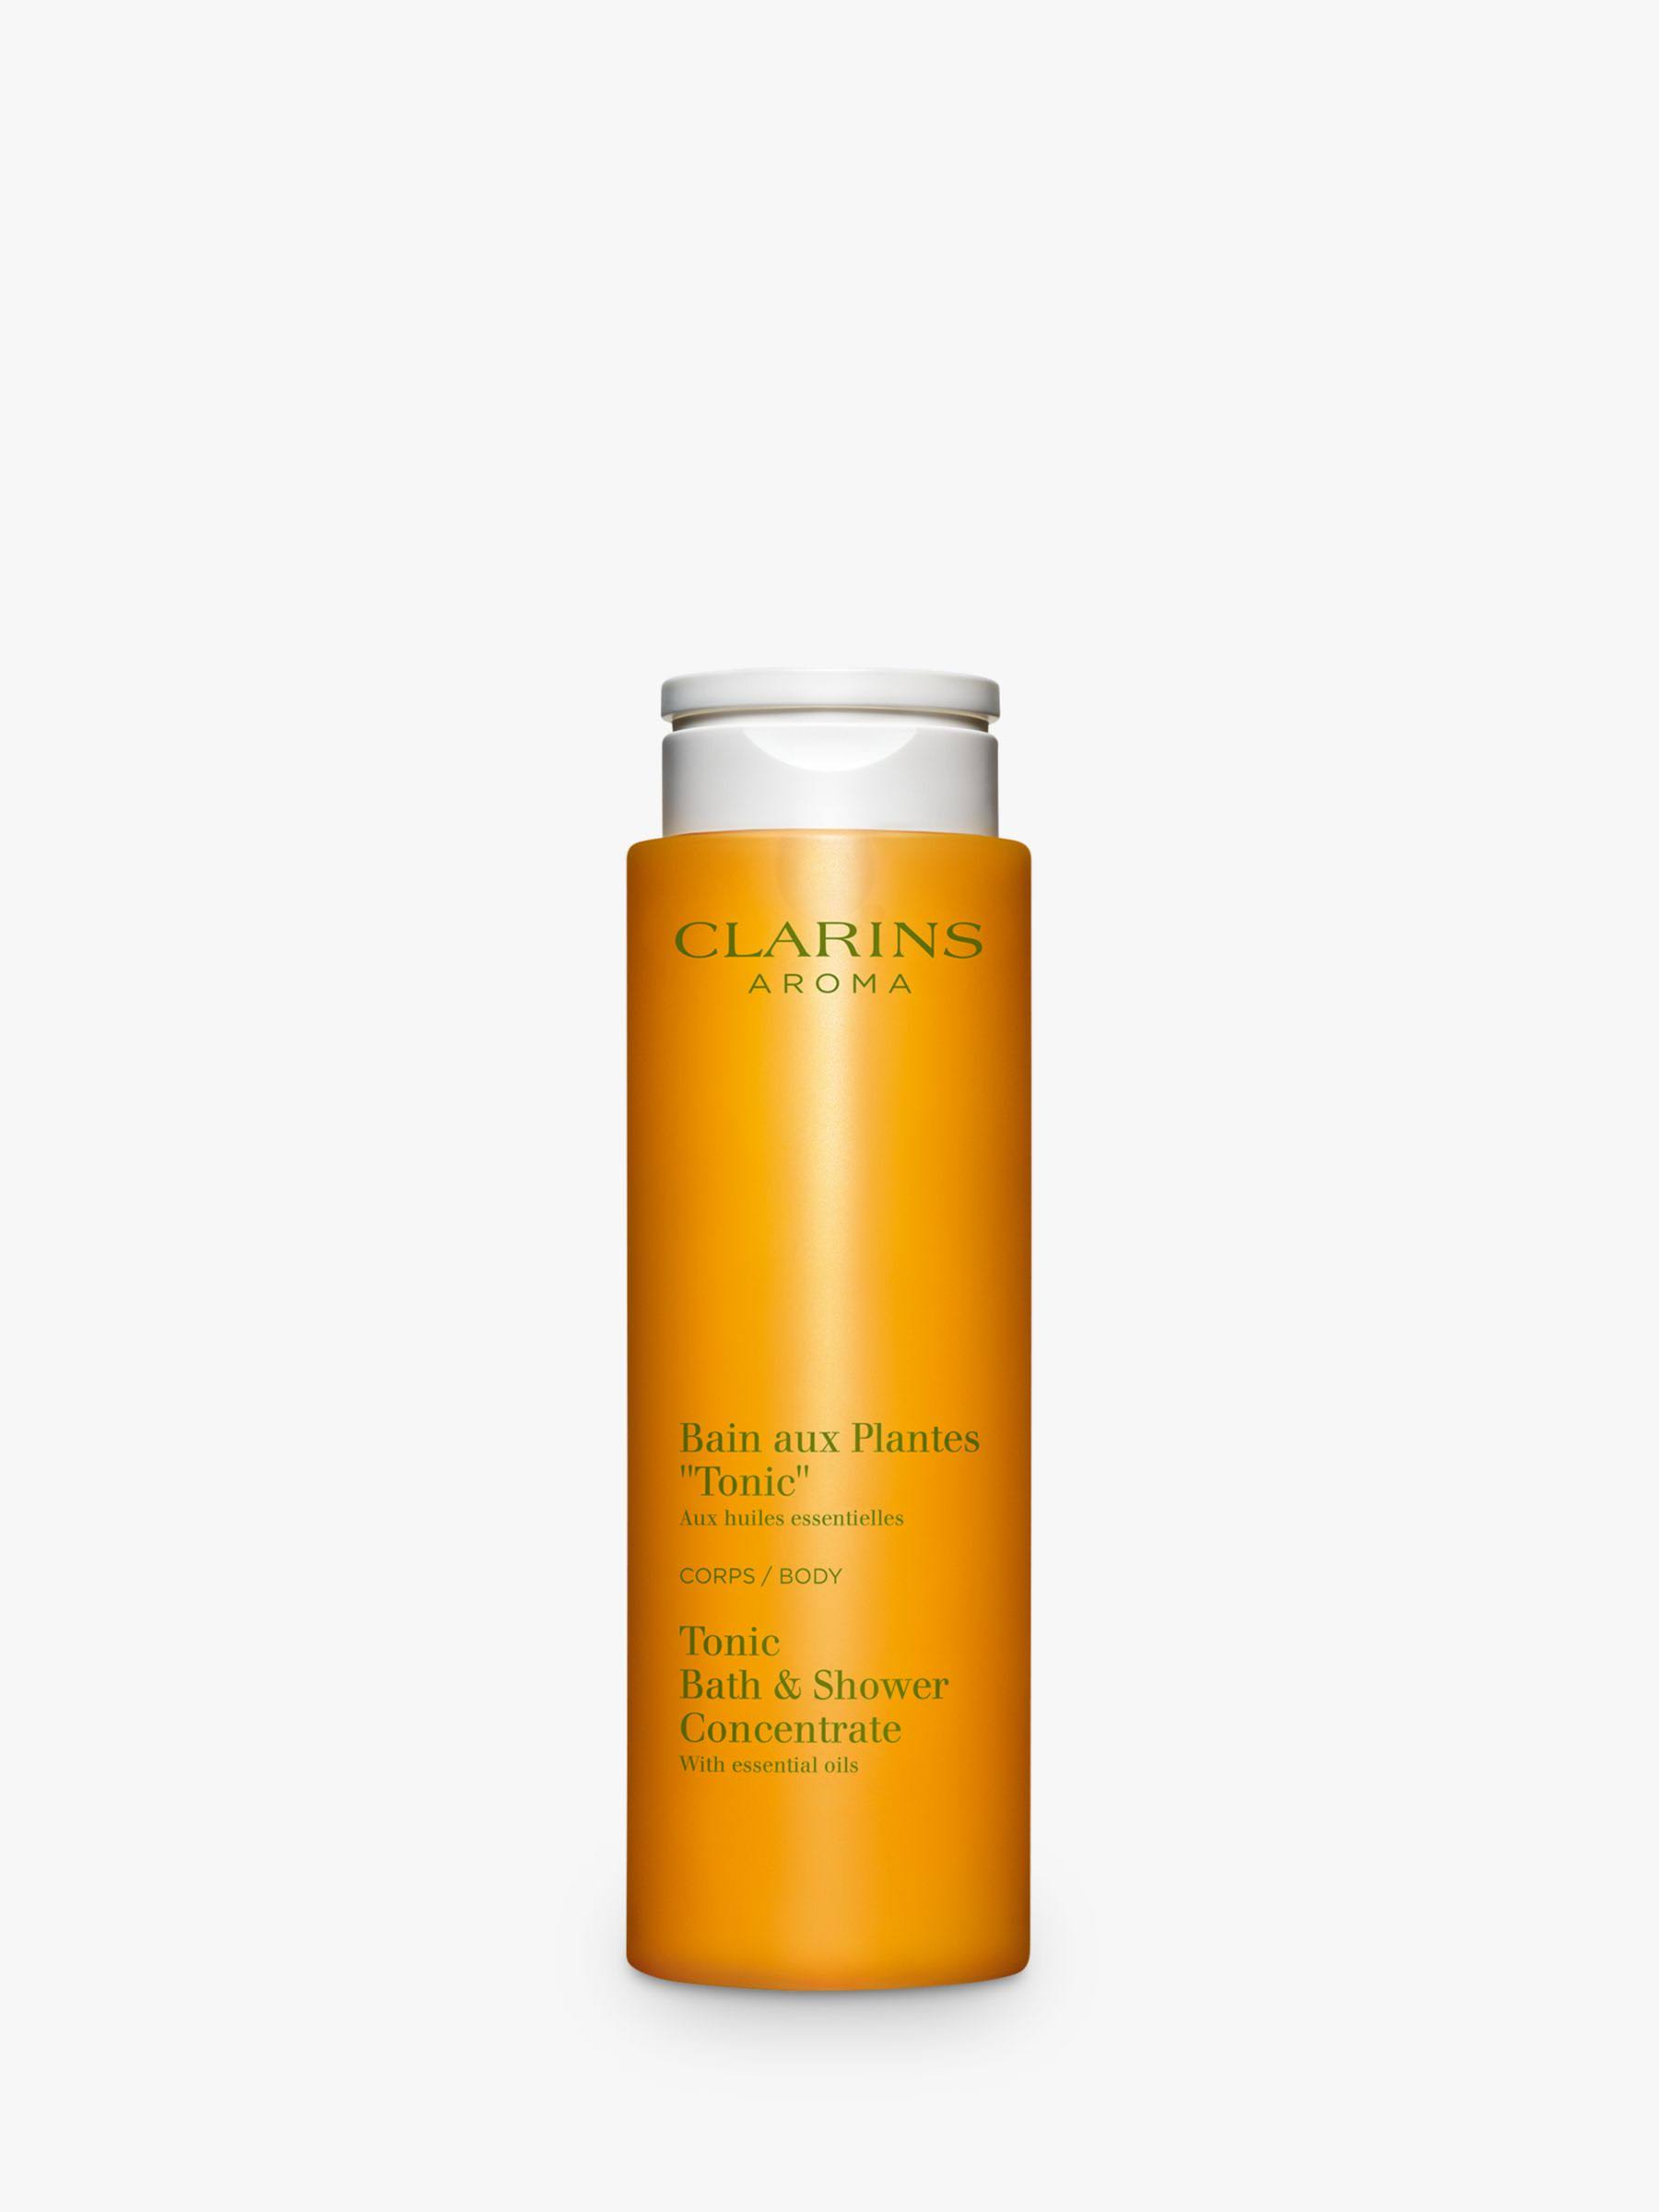 Clarins Tonic Bath & Shower Concentrate - 200ml